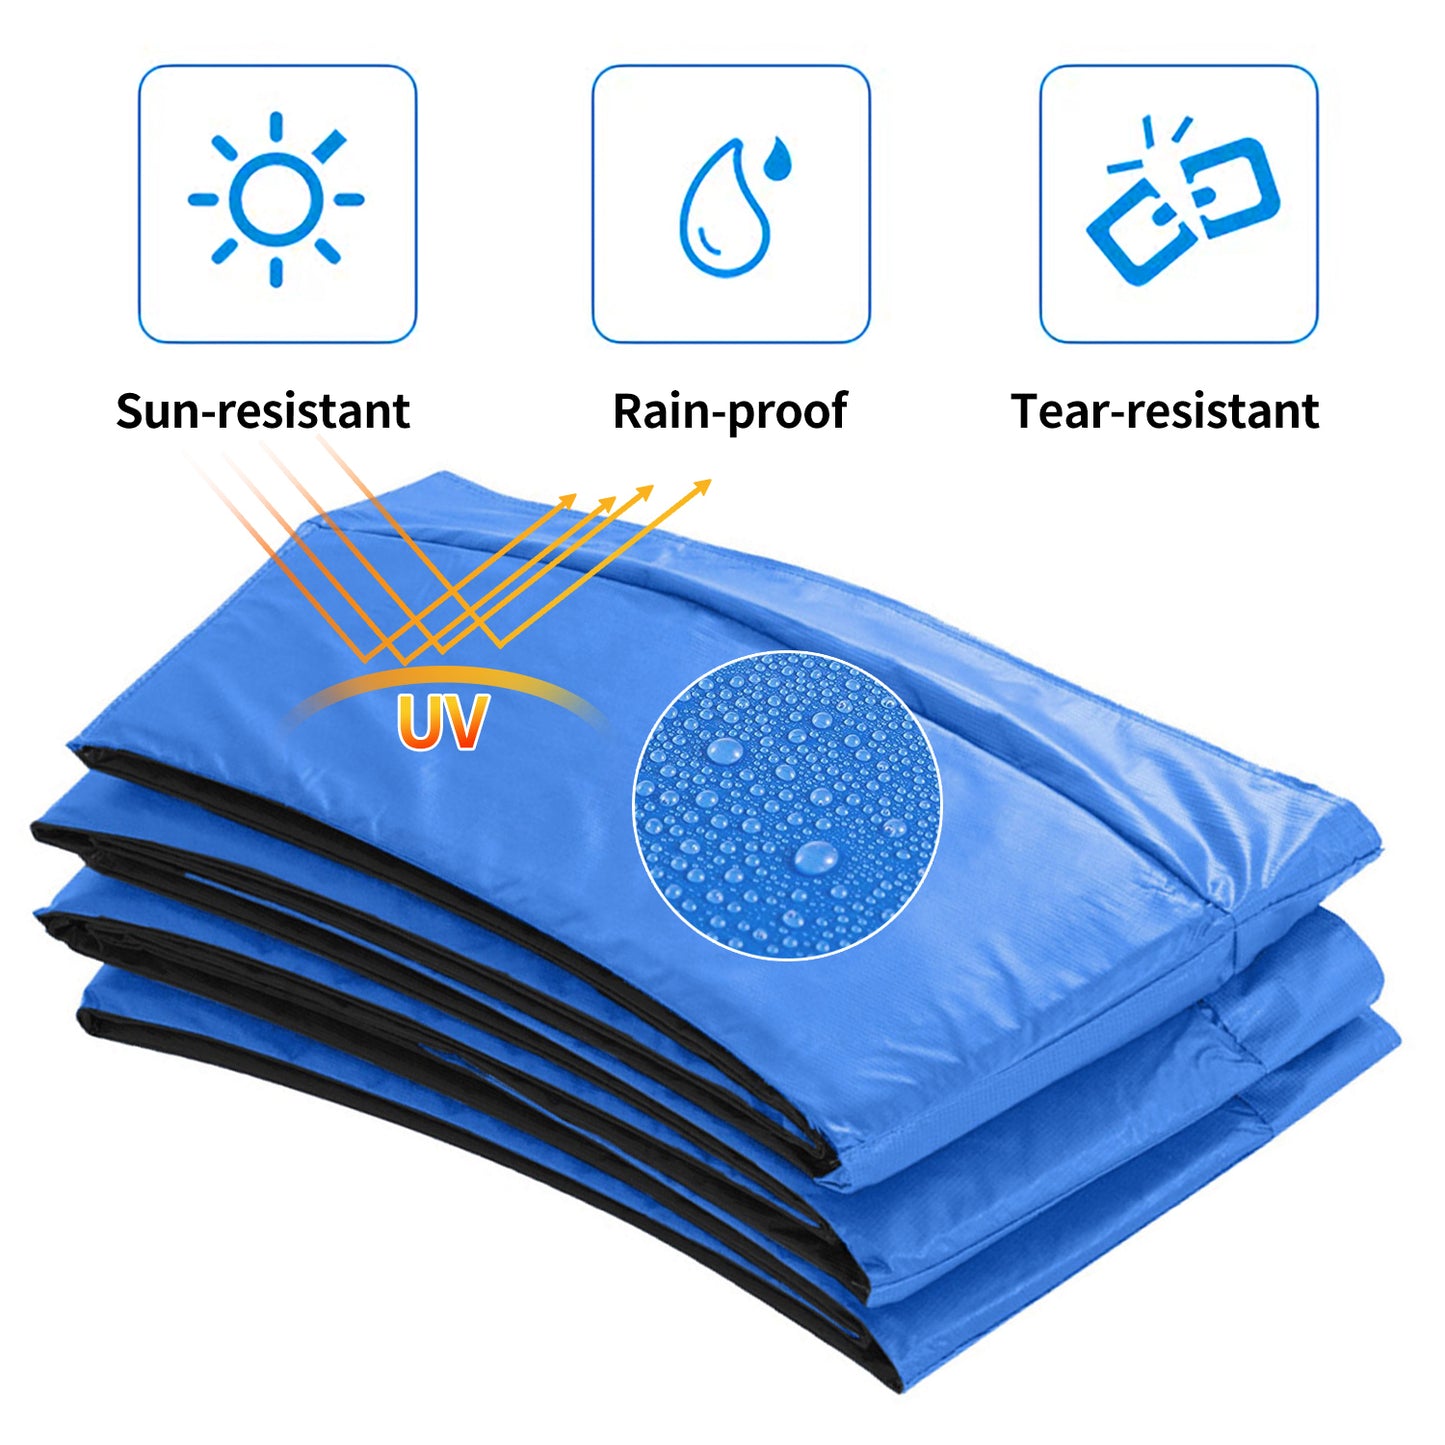 Trampoline Safety Pad for 15ft trampoline - Replacement Spring Cover Pad, No Holes for Poles, Waterproof&UV-Resistant